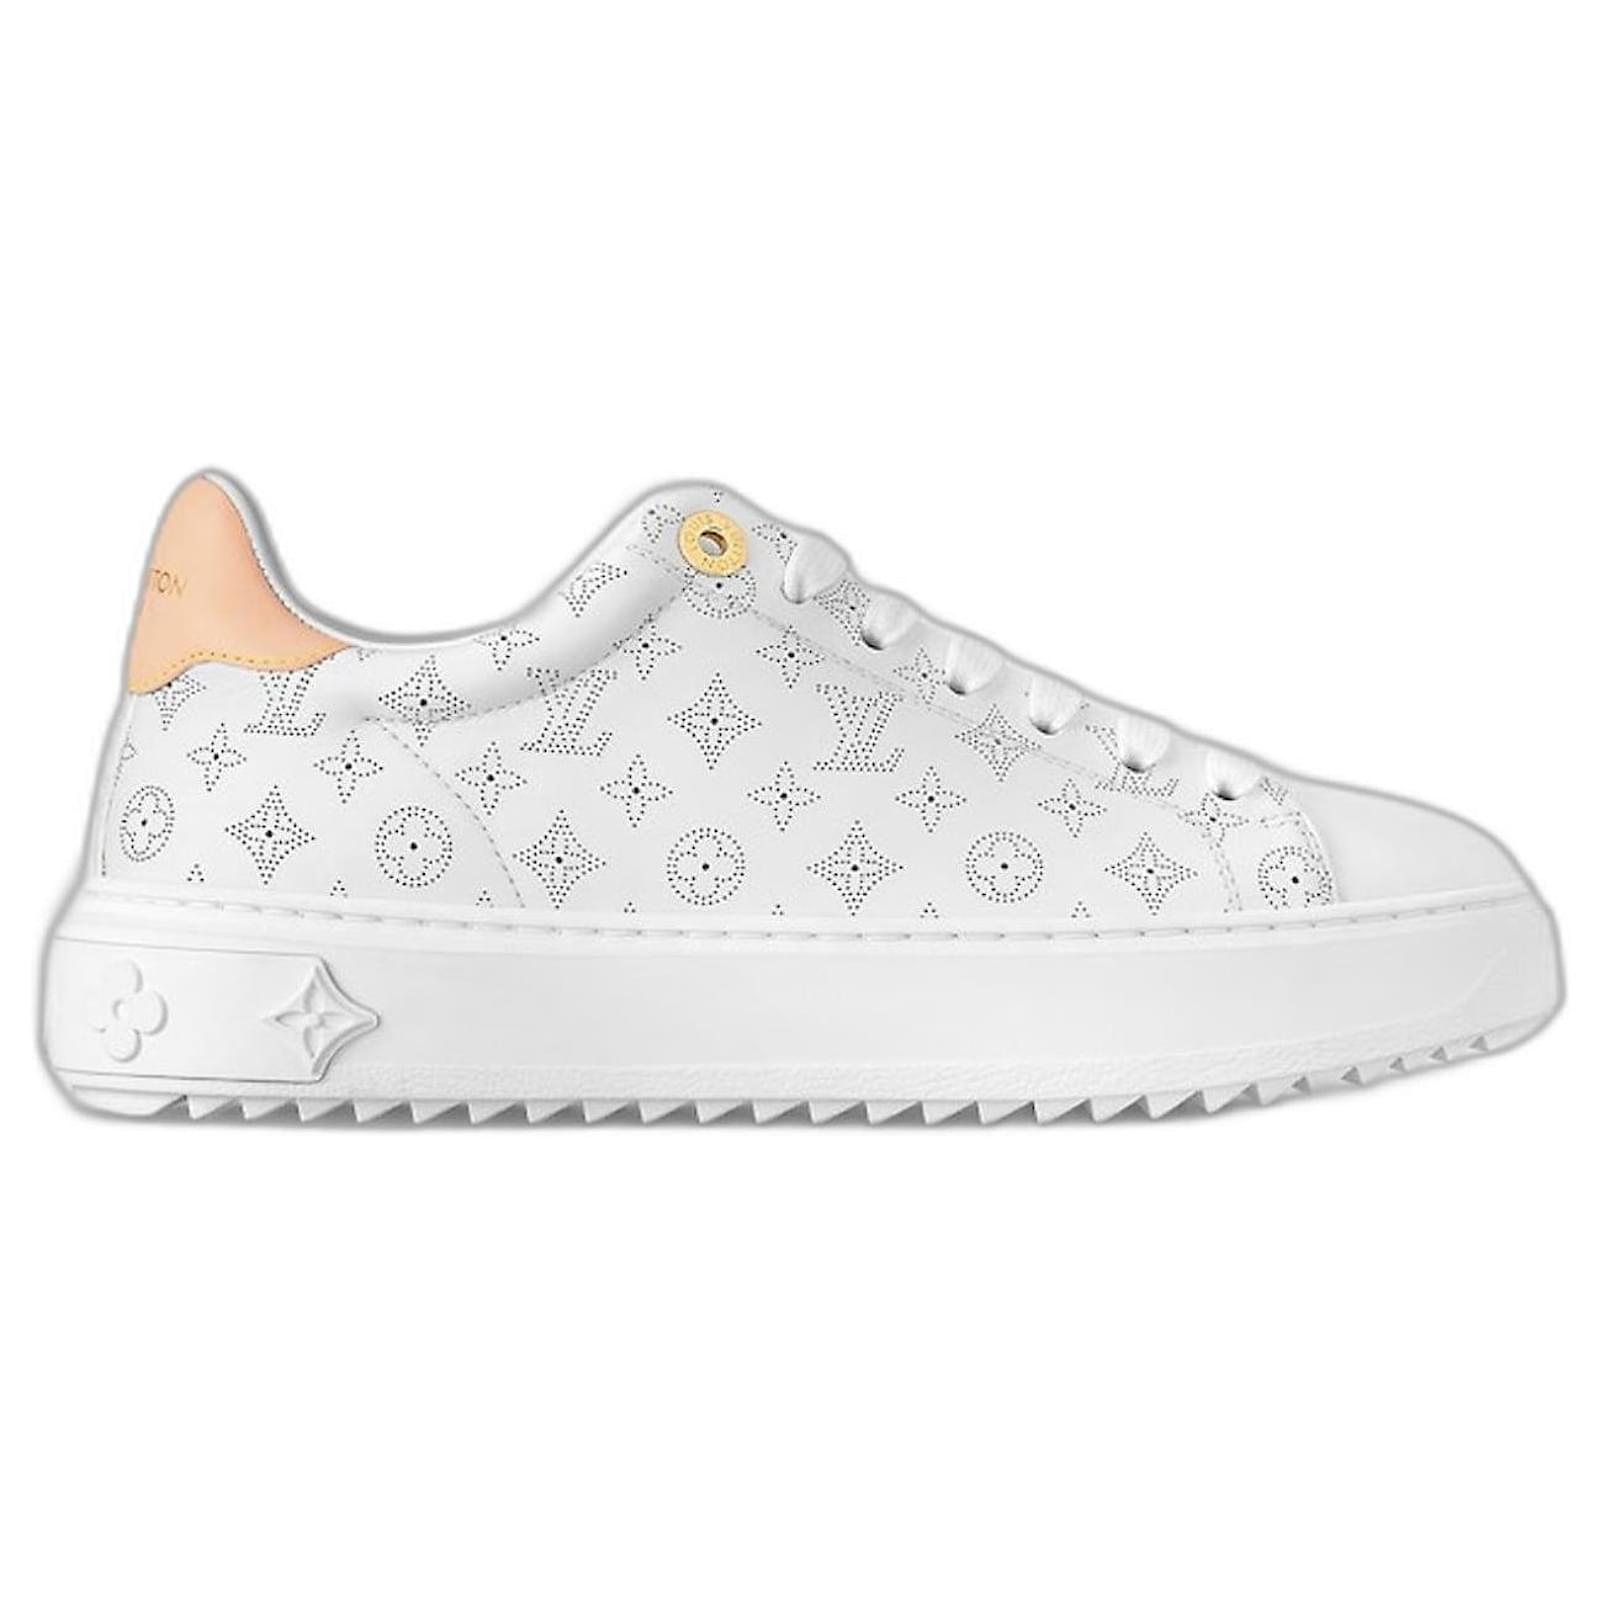 Lv trainer leather low trainers Louis Vuitton White size 40.5 EU